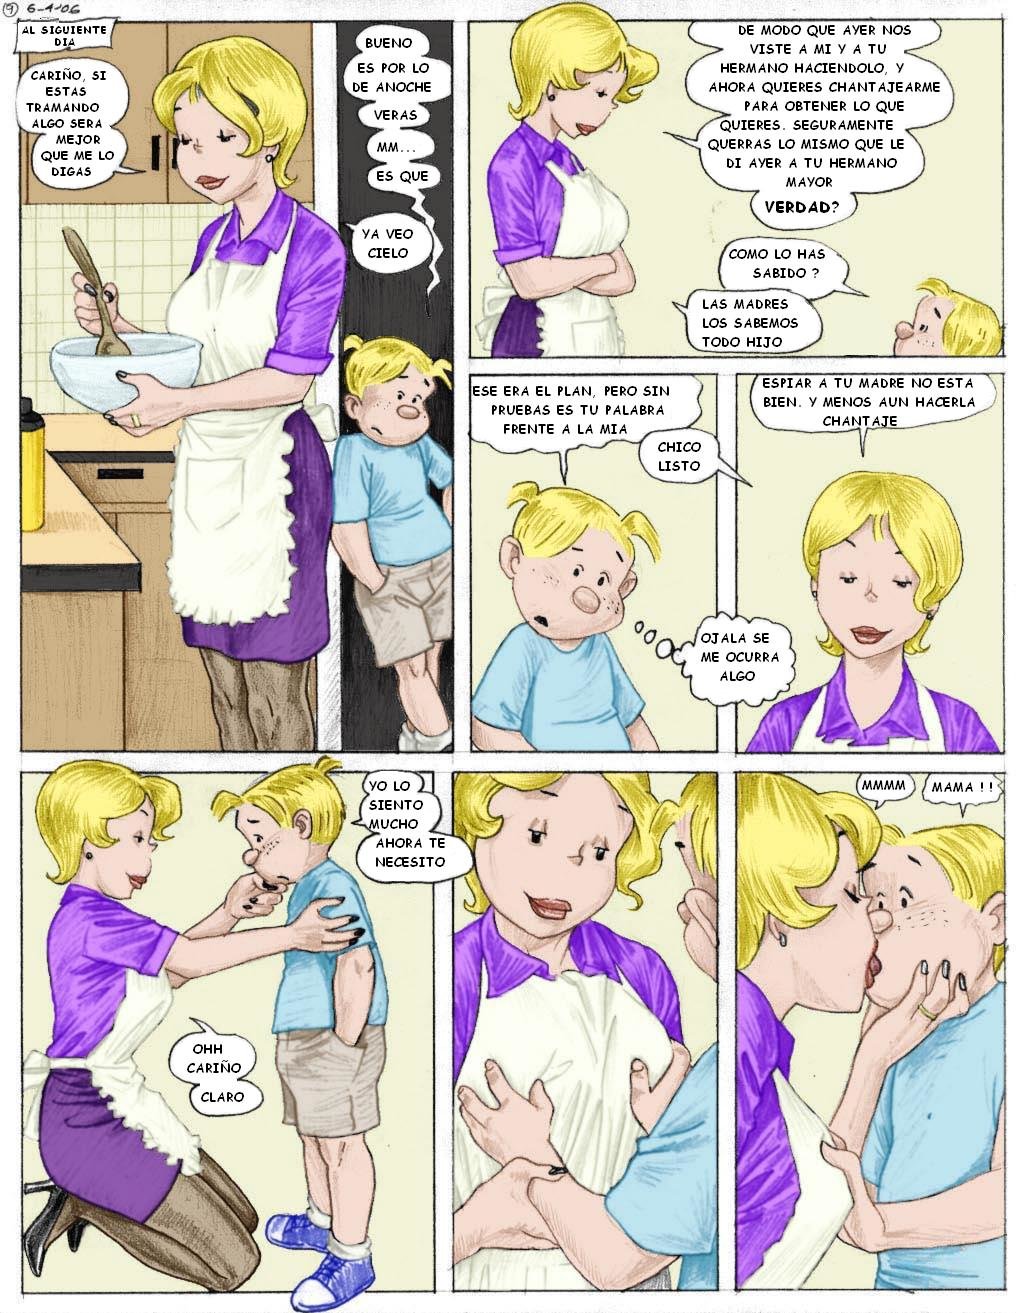 Lois and her Two Sons (Hi and Lois) - 9